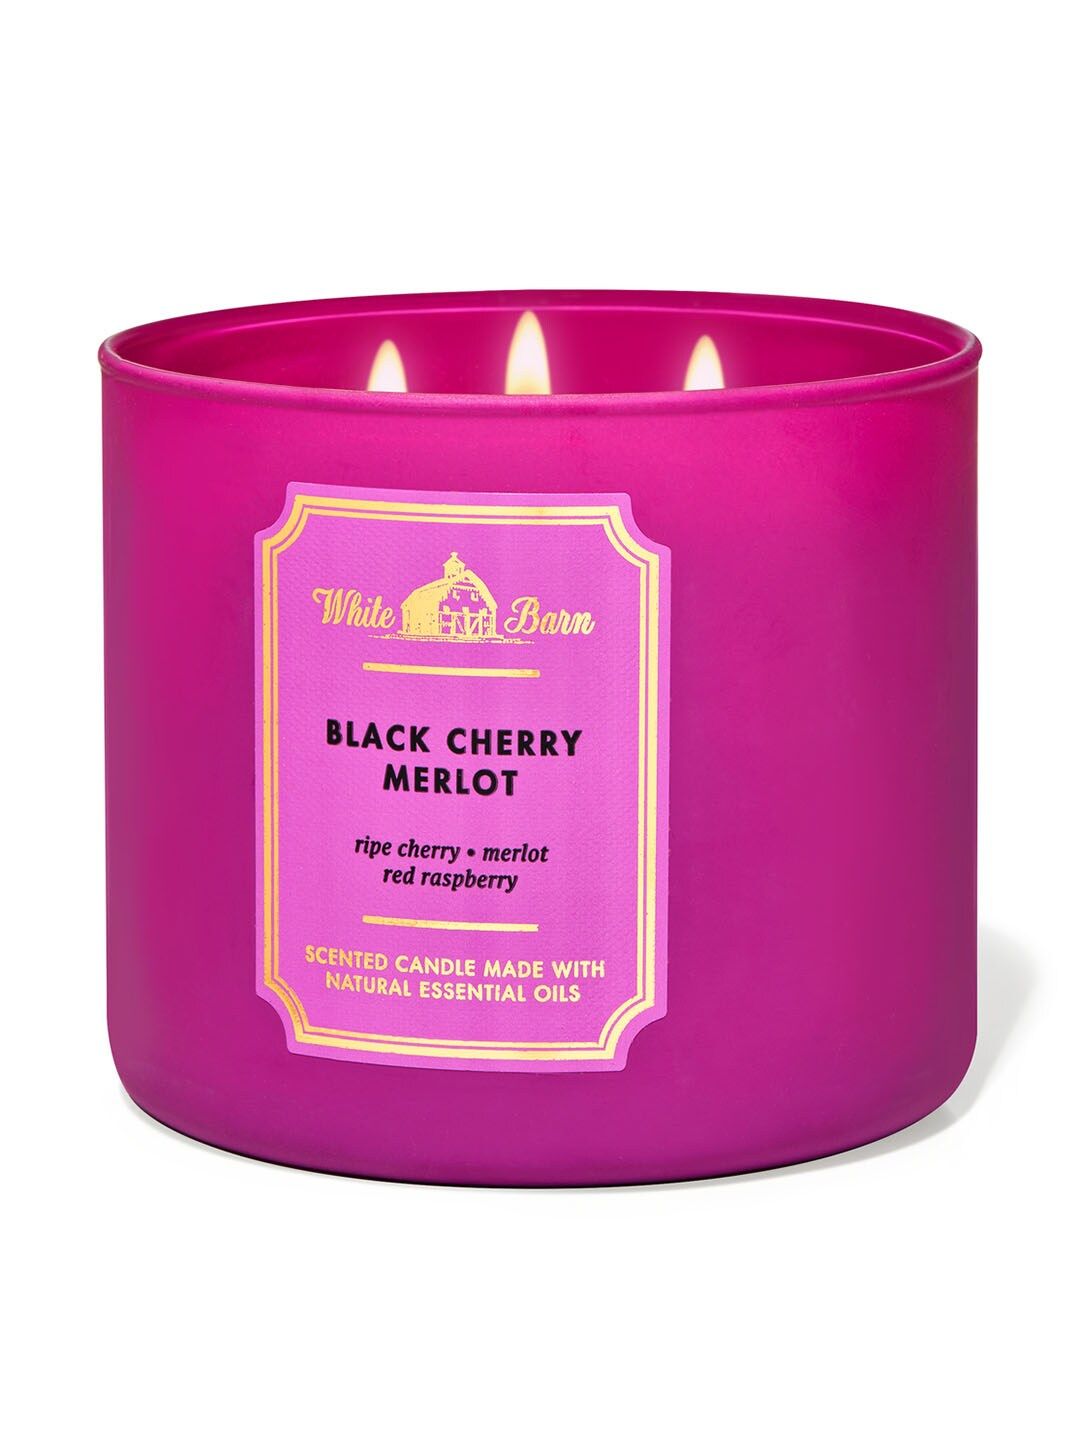 Bath & Body Works Black Cherry Merlot 3-Wick Scented Candle - 411g Price in India